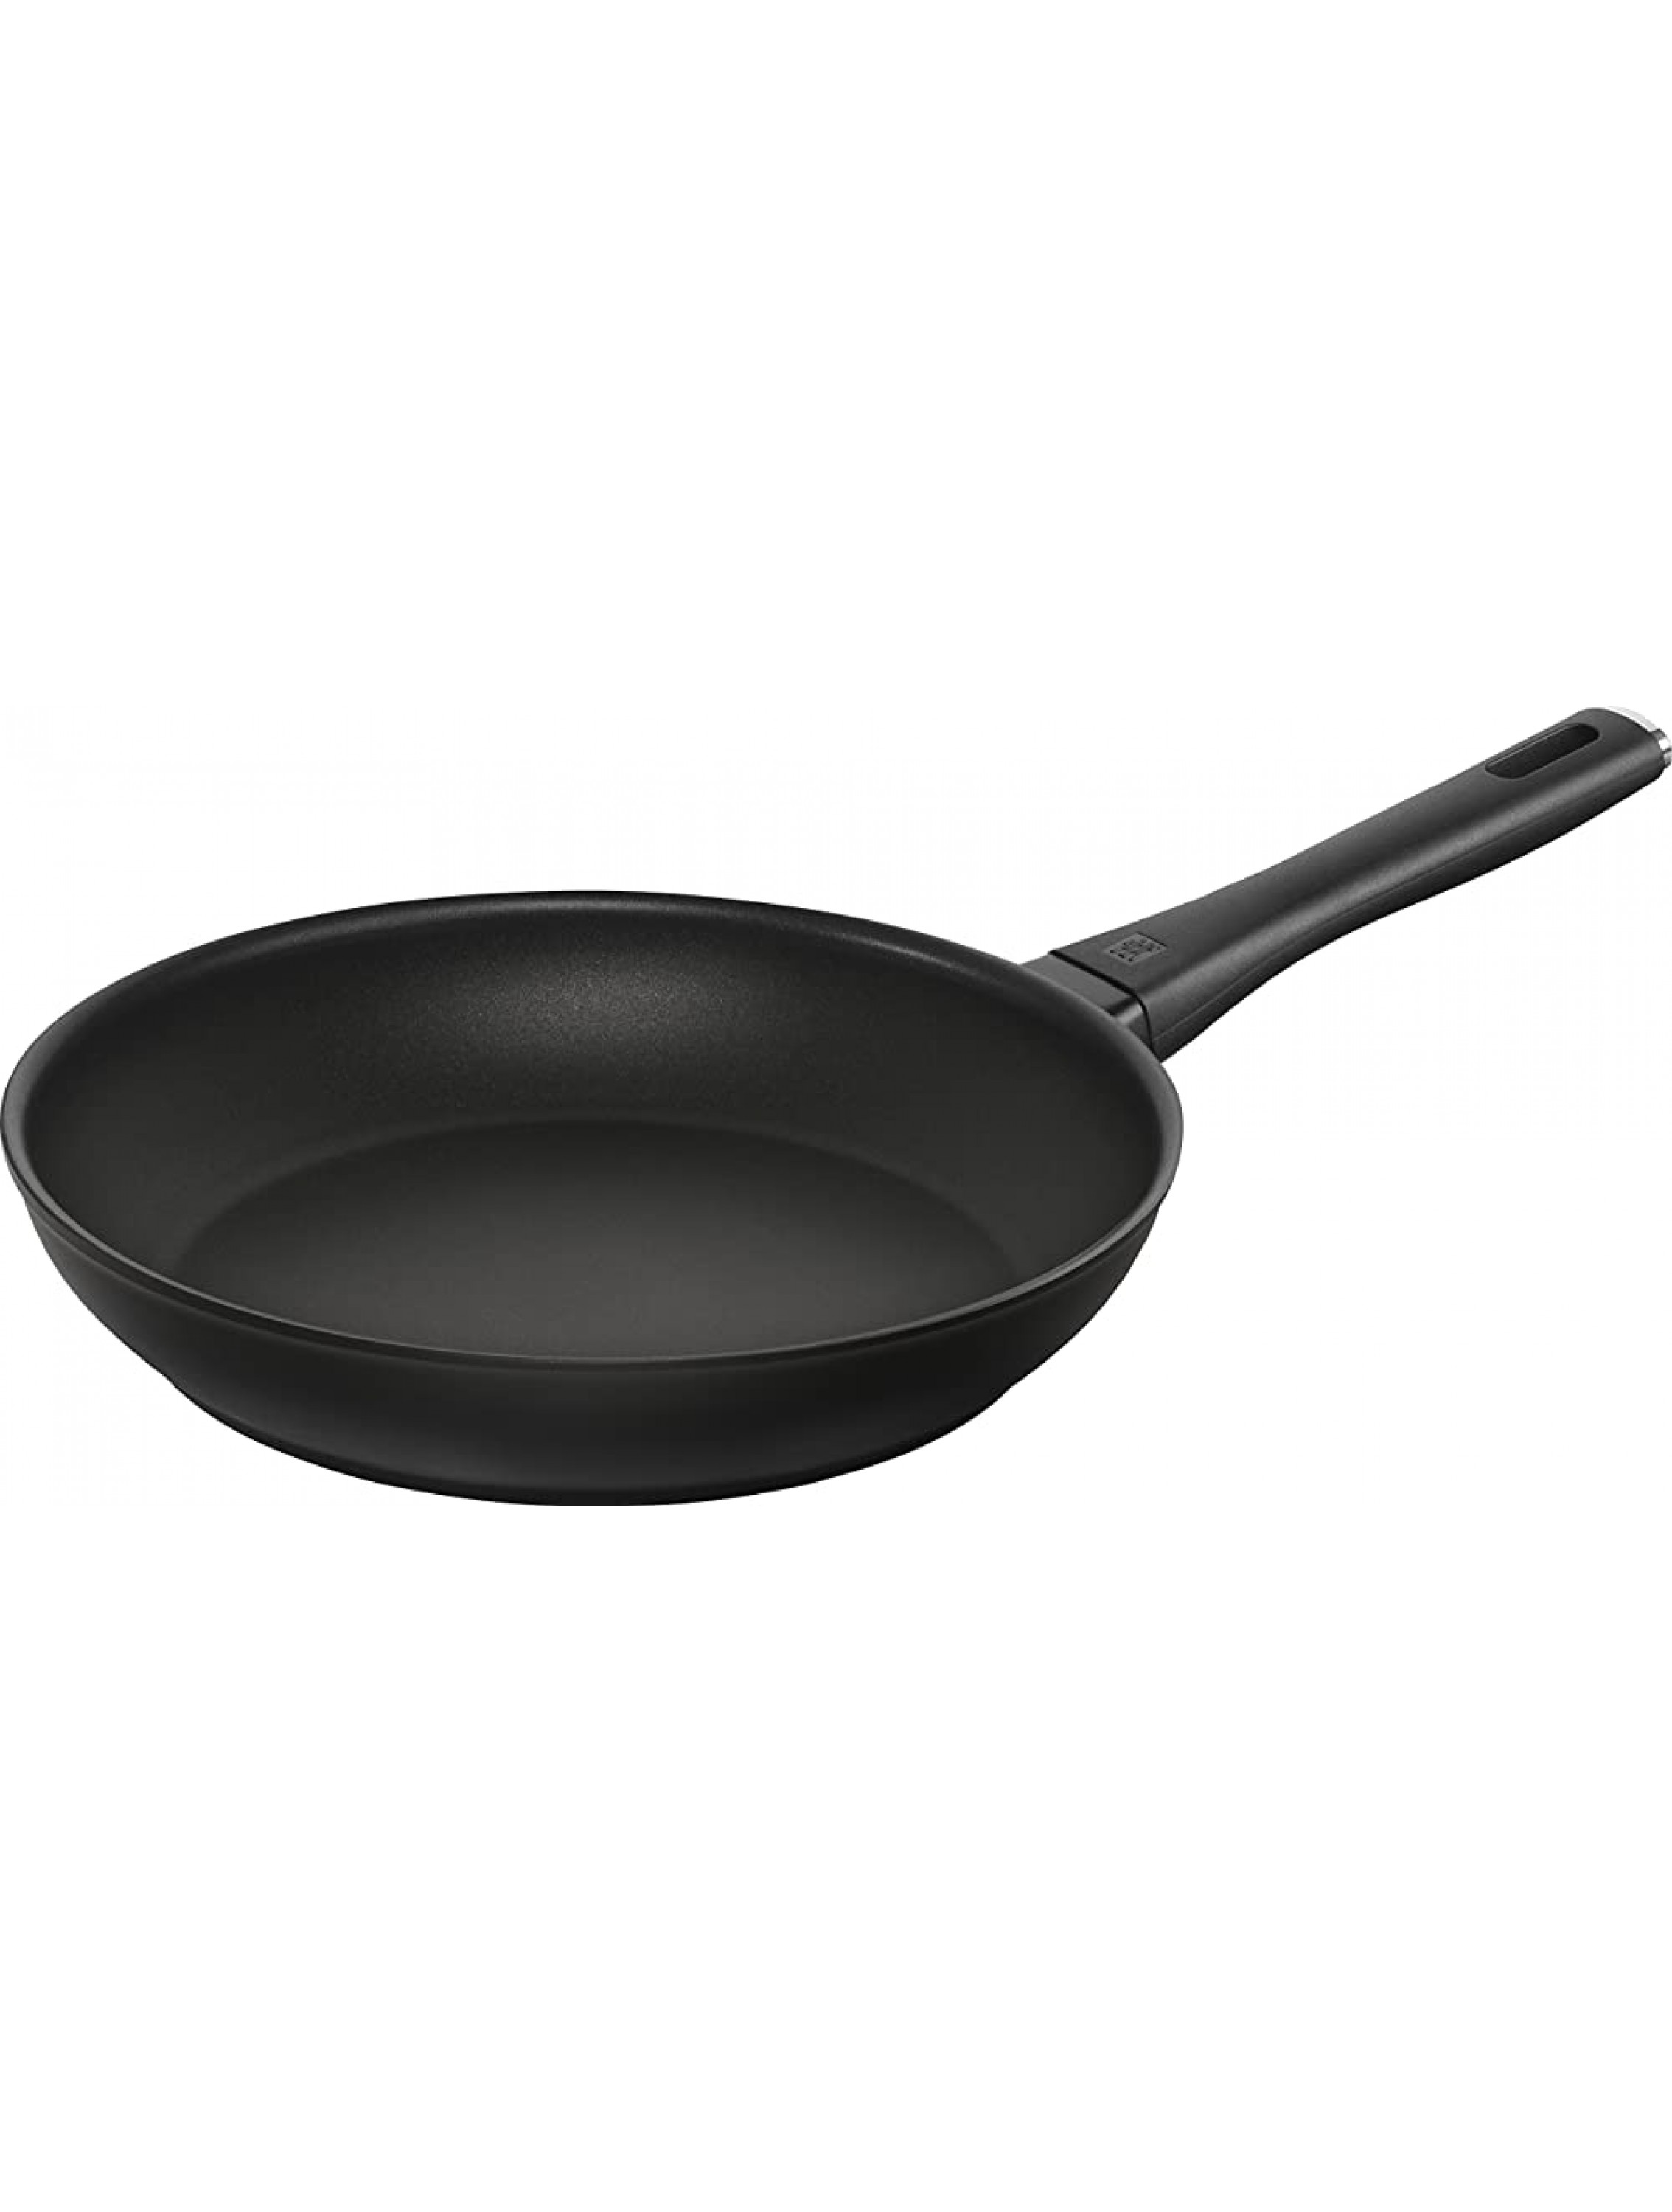 Zwilling Madura Plus 11 inches Non-Stick Frying Pan - BJ1YMH45B